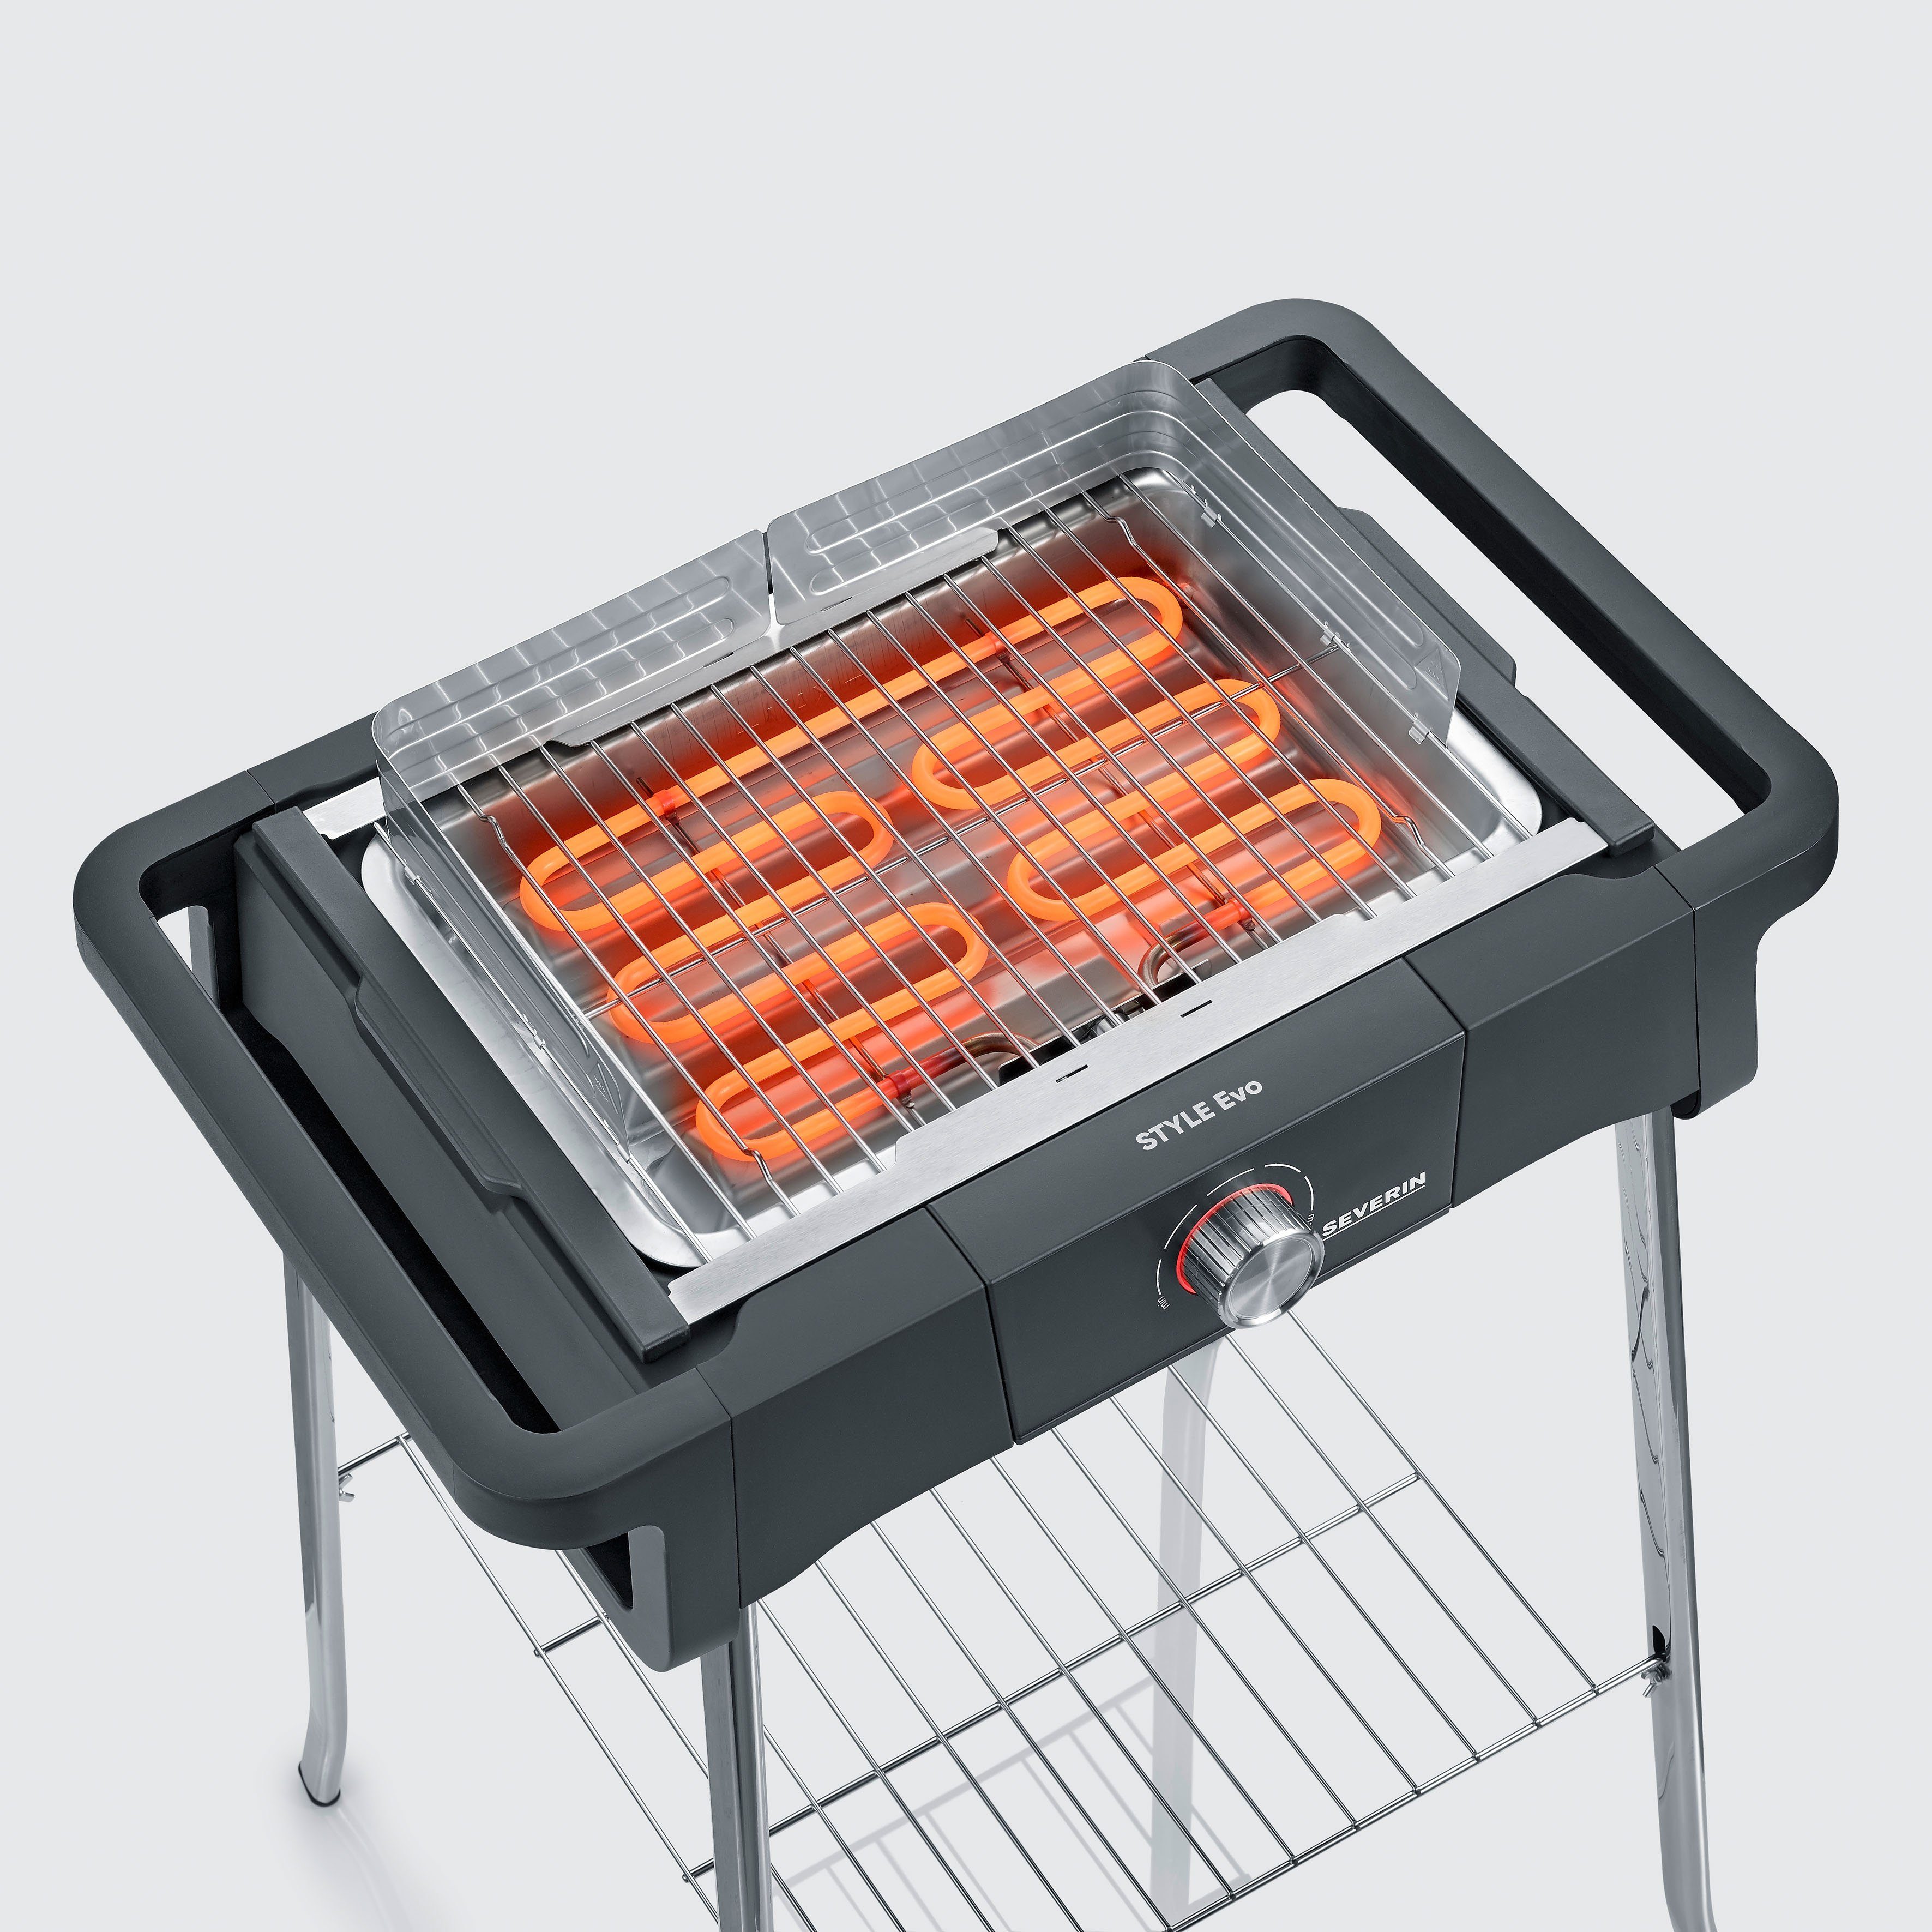 W PG S, EVO 2500 8124 Standgrill Severin STYLE